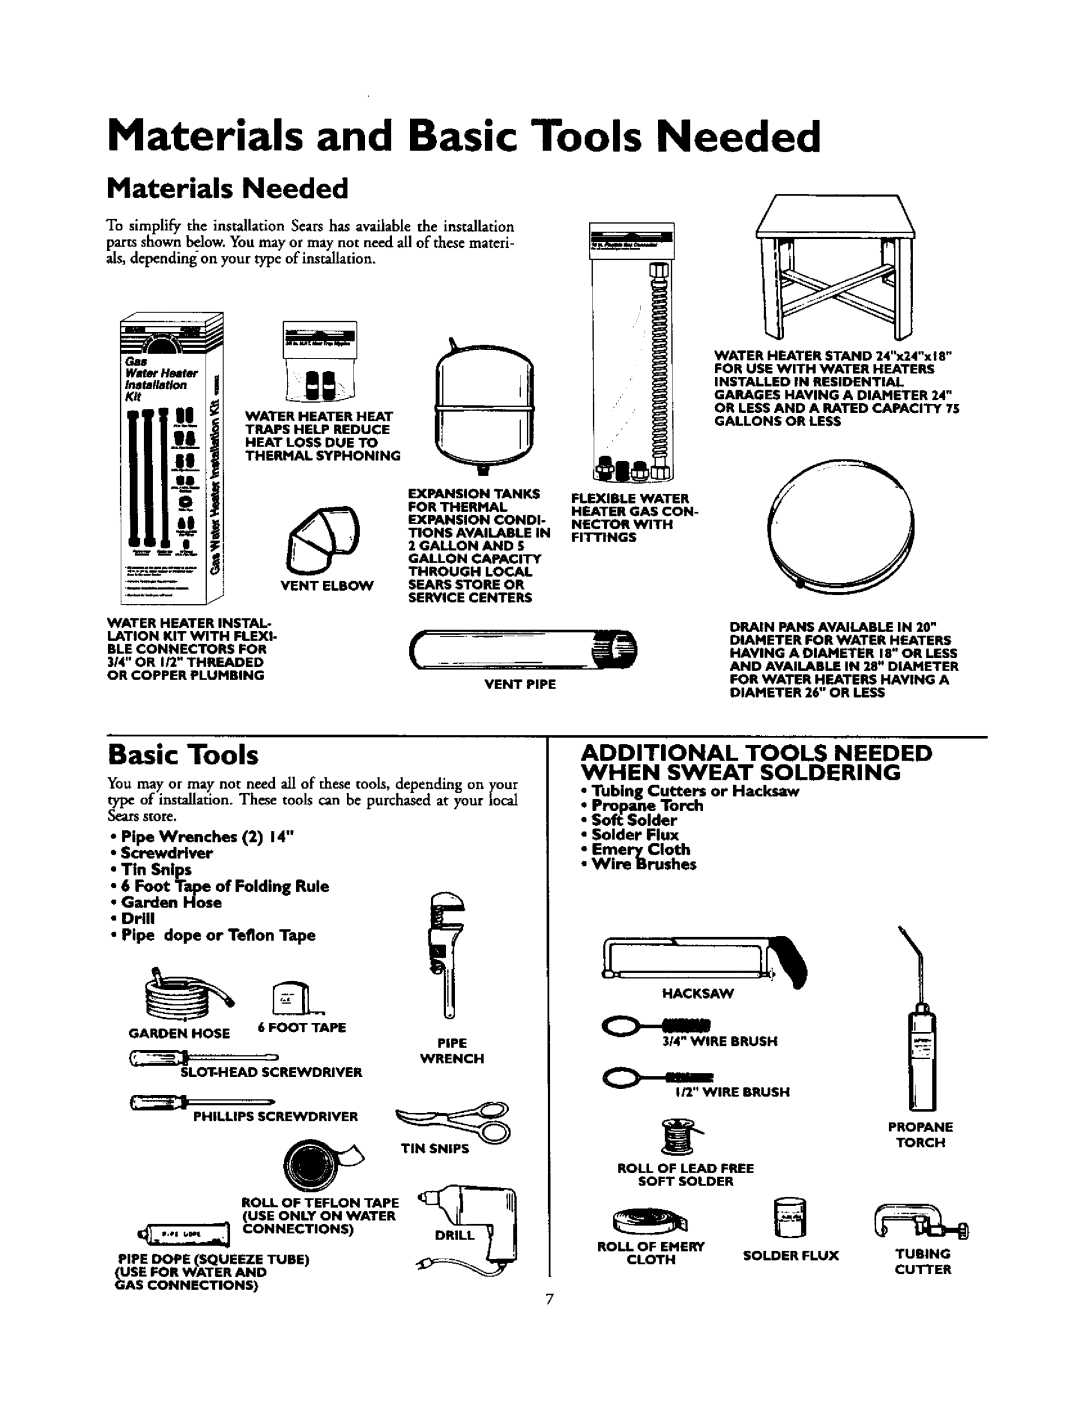 Kenmore 153.337213 Materials and Basic Tools Needed, Materials Needed, Additional Tools Needed When Sweat Soldering 